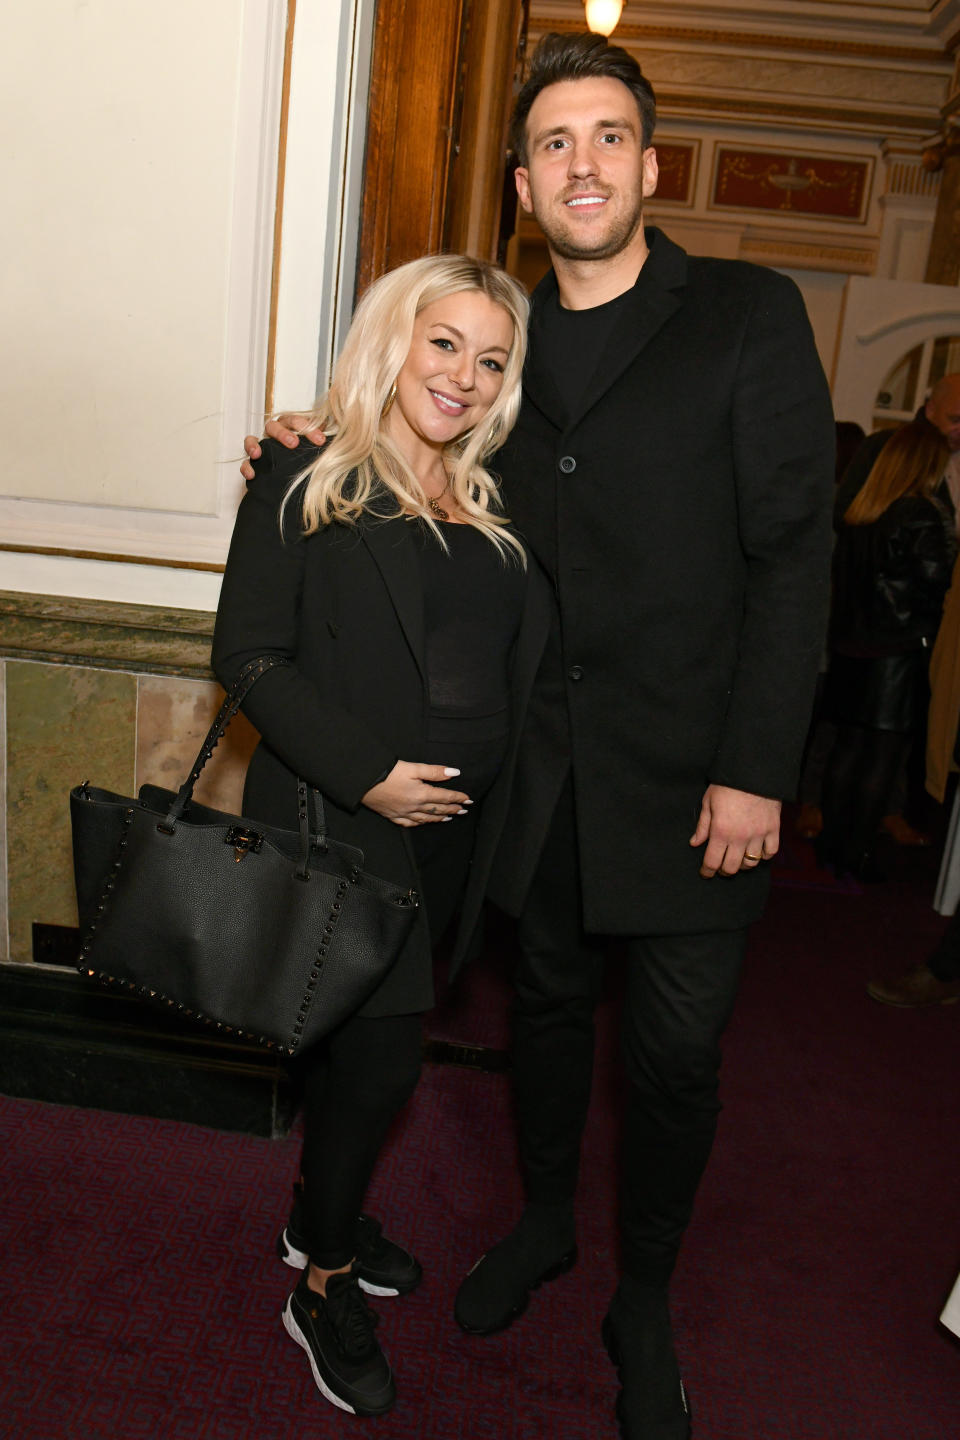 Sheridan Smith and Jamie Horn attend the Gala Charity Concert of "The Pirate Queen" in aid of Leukaemia UK at The London Coliseum on February 23, 2020 in London, England.  (Photo by David M. Benett/Dave Benett/WireImage)